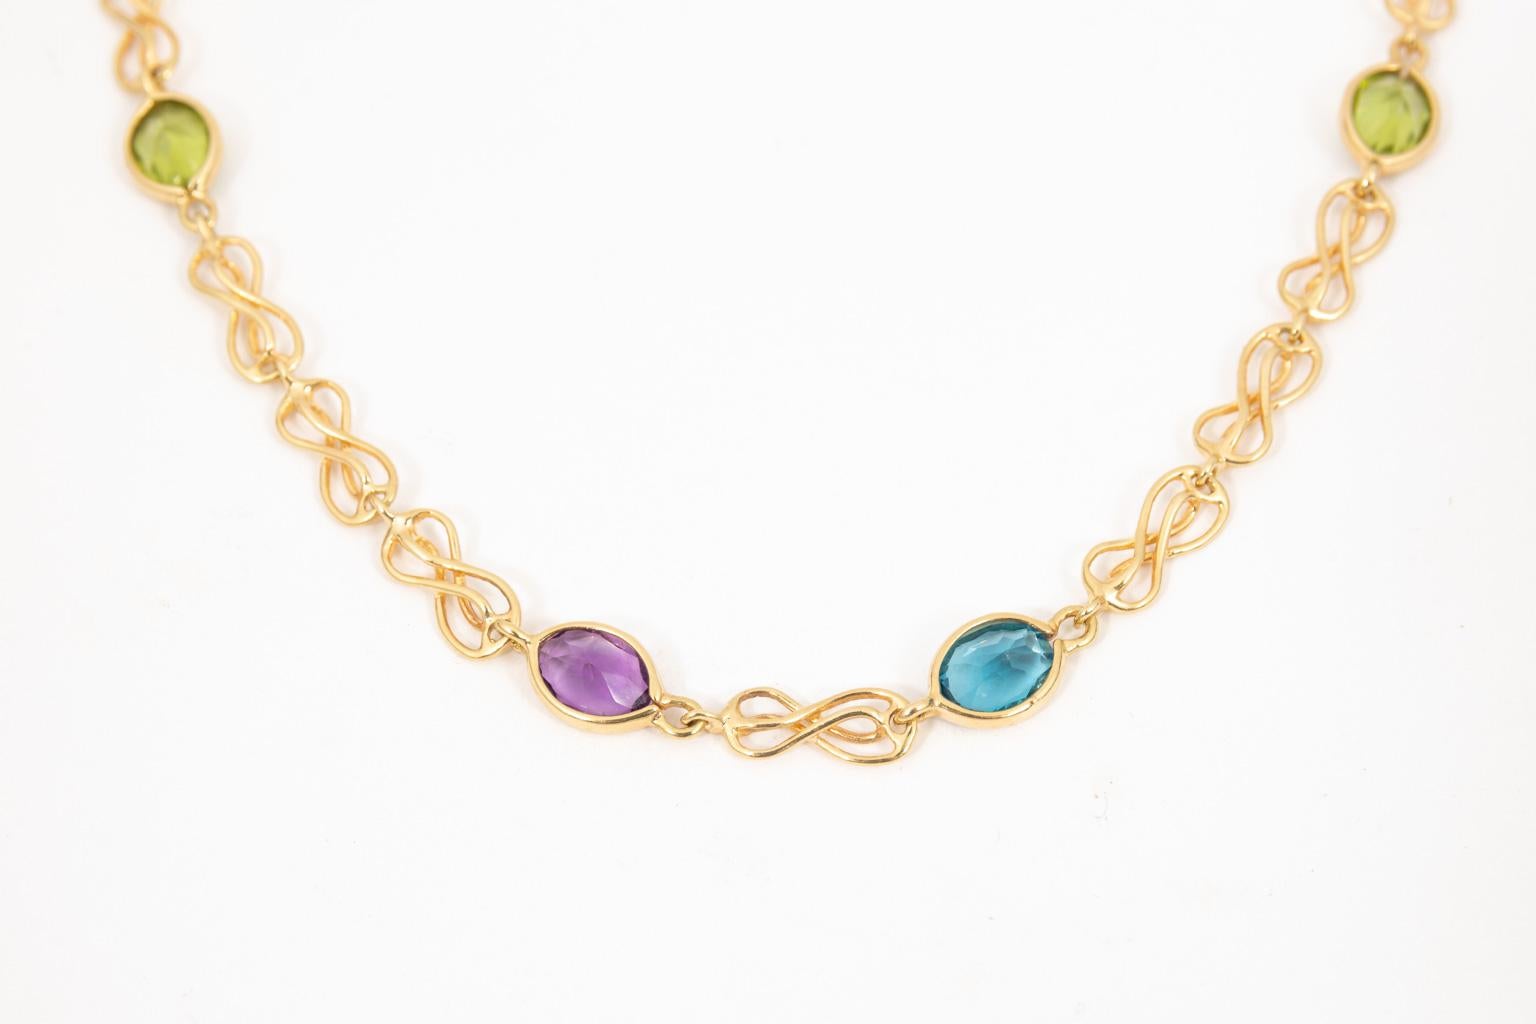 Lovely hand crafted necklace. There are 18 bezel set Amethyst, Peridot and Blue Topaz each about 6 X 8 mm or 1 carat. The gemstones are linked with hand crafted twisted links, and finished with a lobster claw clasp. The necklace is very heavy at